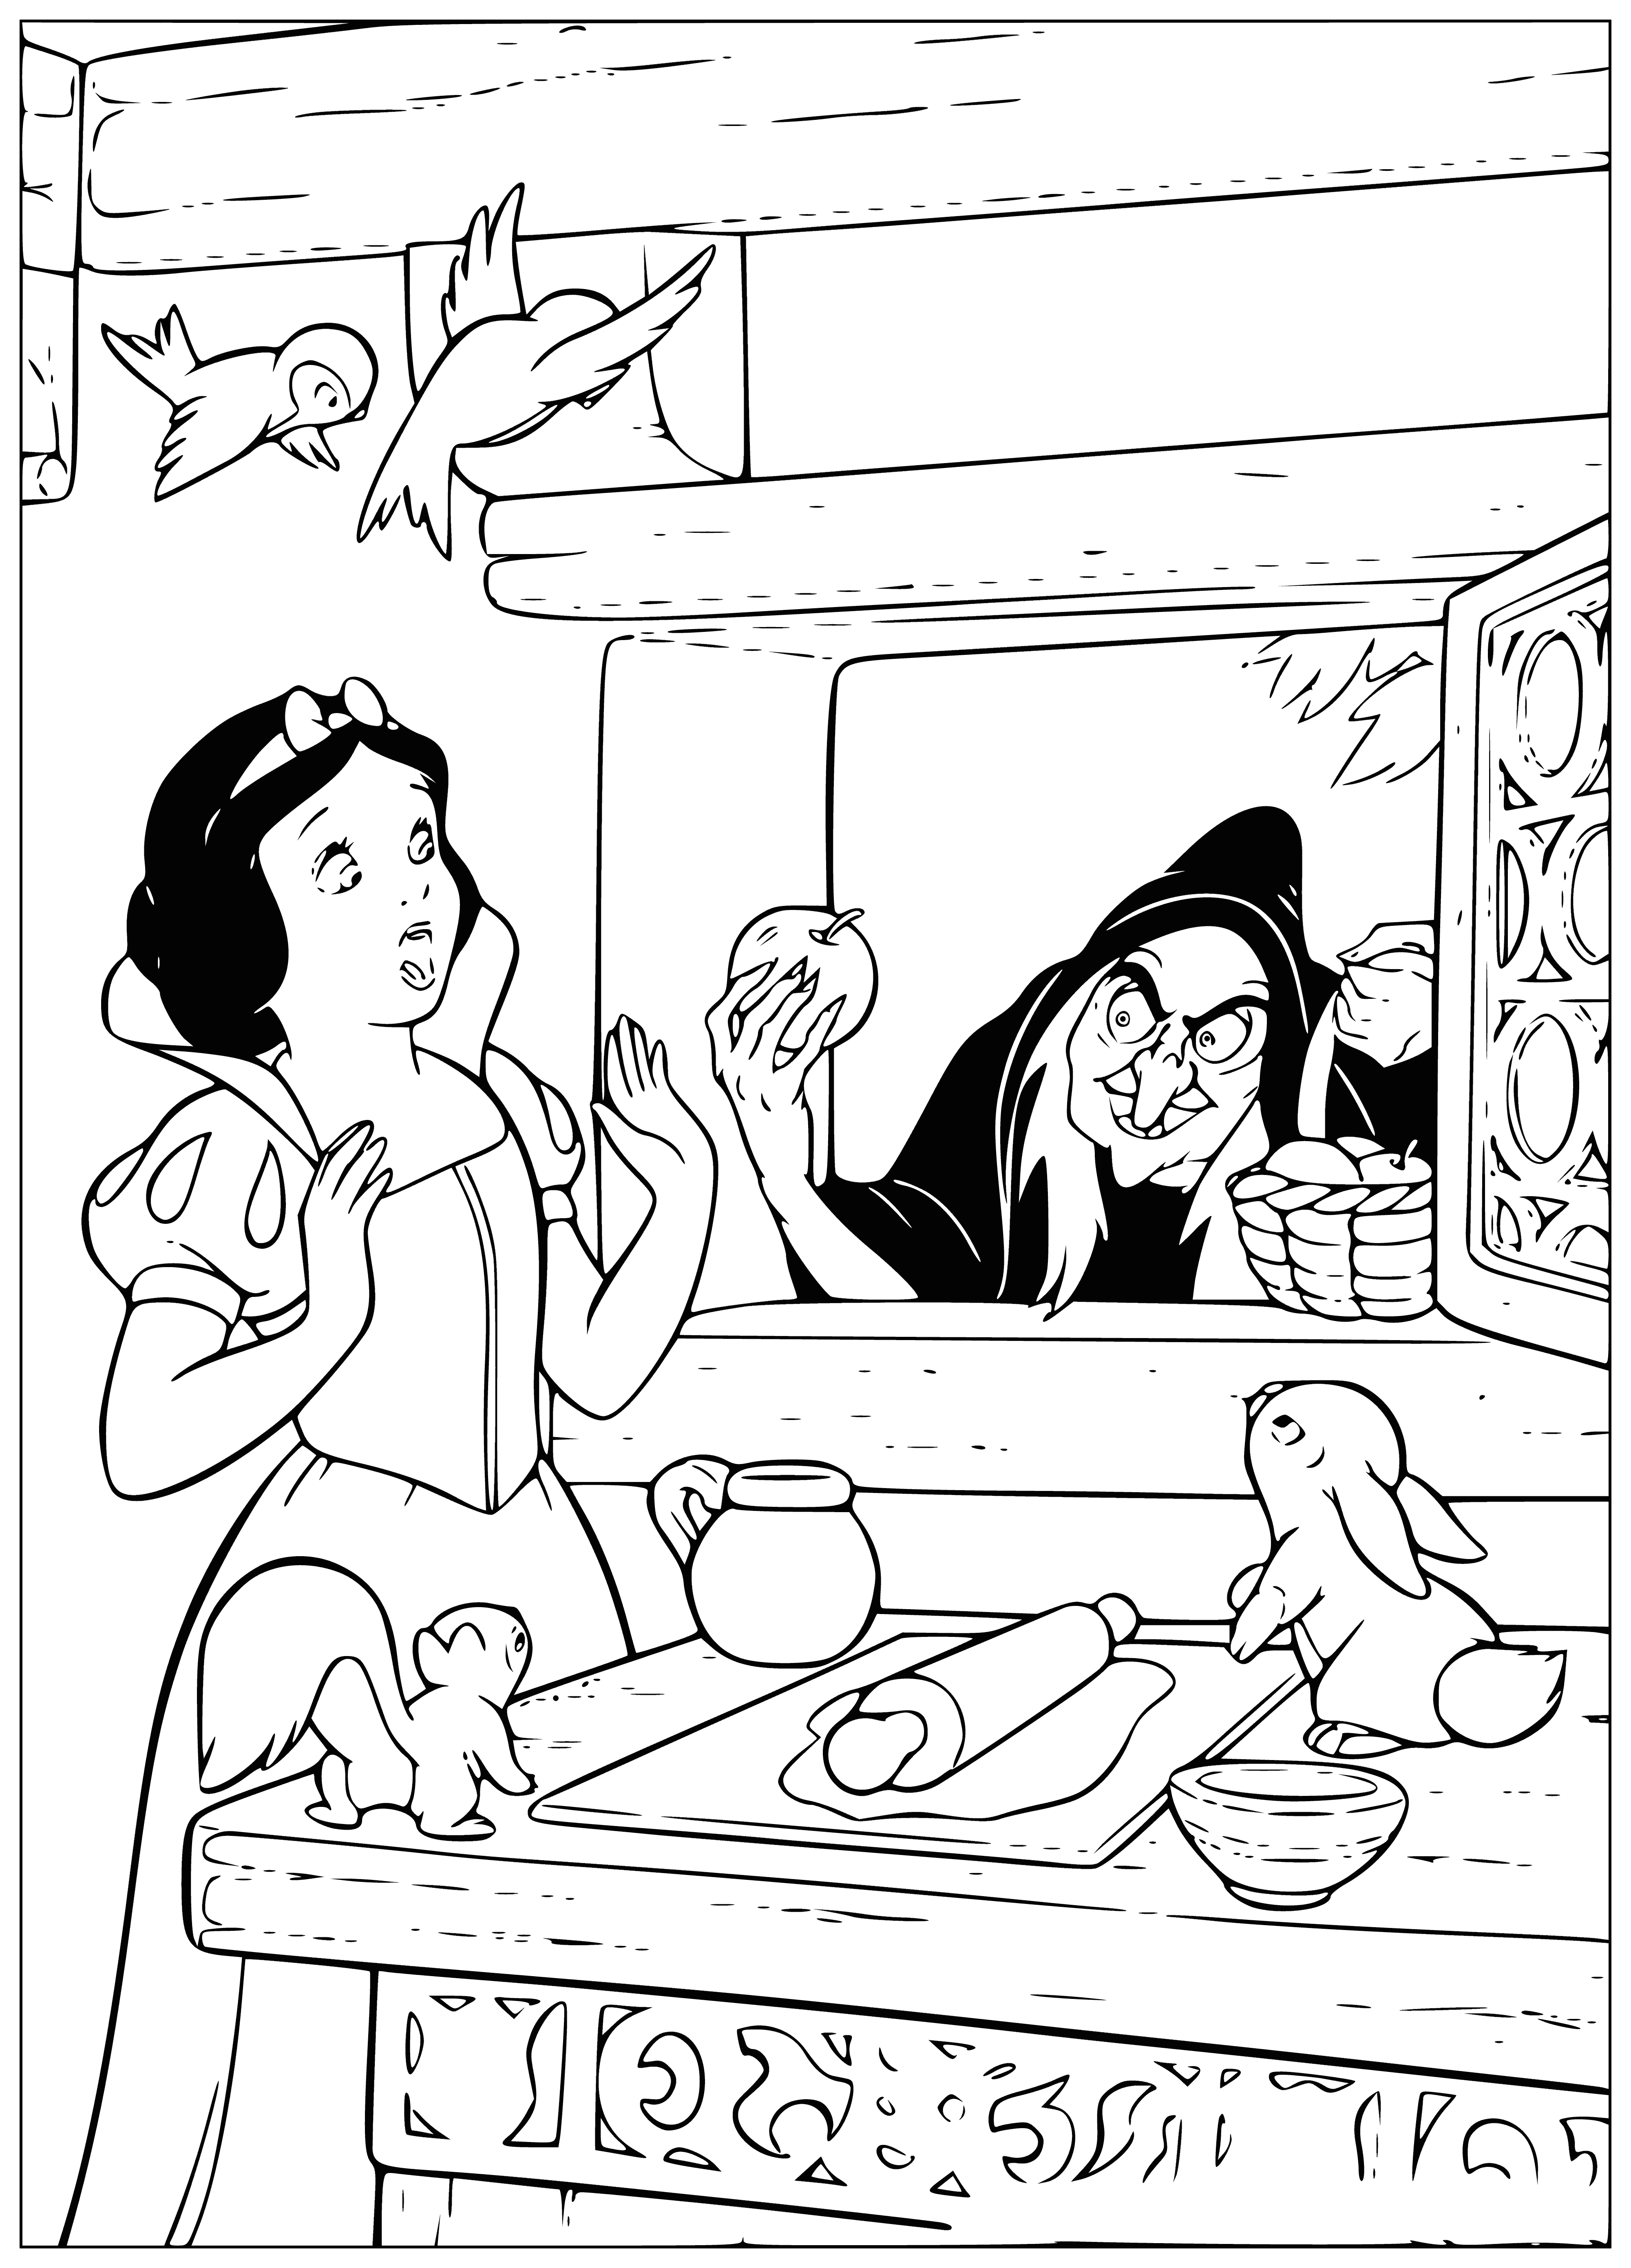 Poisoned apple coloring page